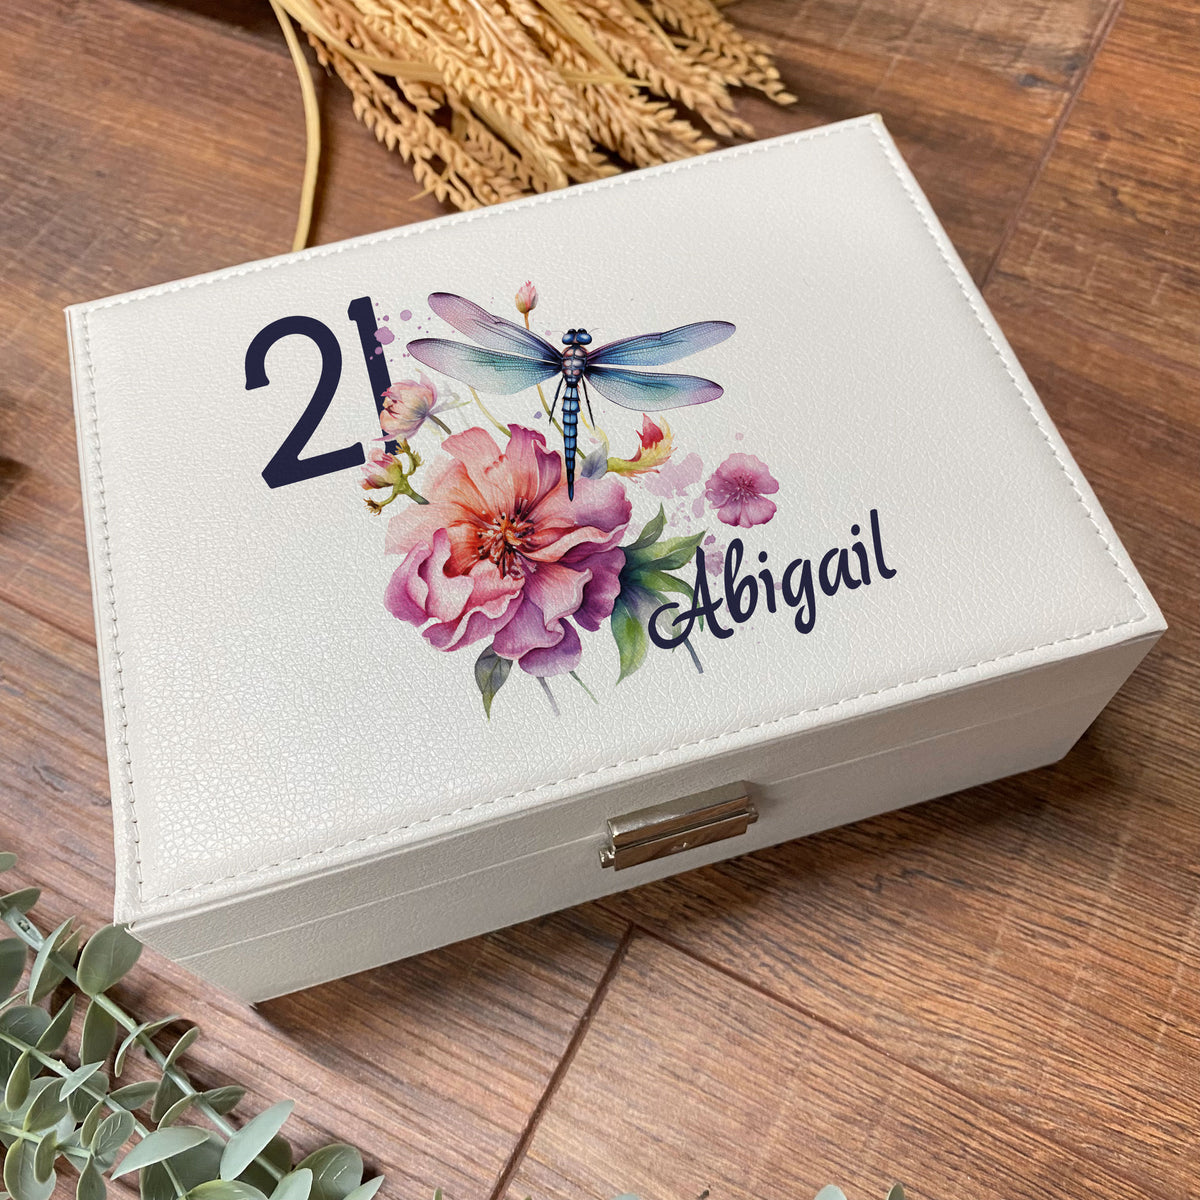 Personalised Any Age Birthday Large Jewellery Box Gift Dragonfly Design 13th 16th 18th 21st 30th 40th 50th 60th